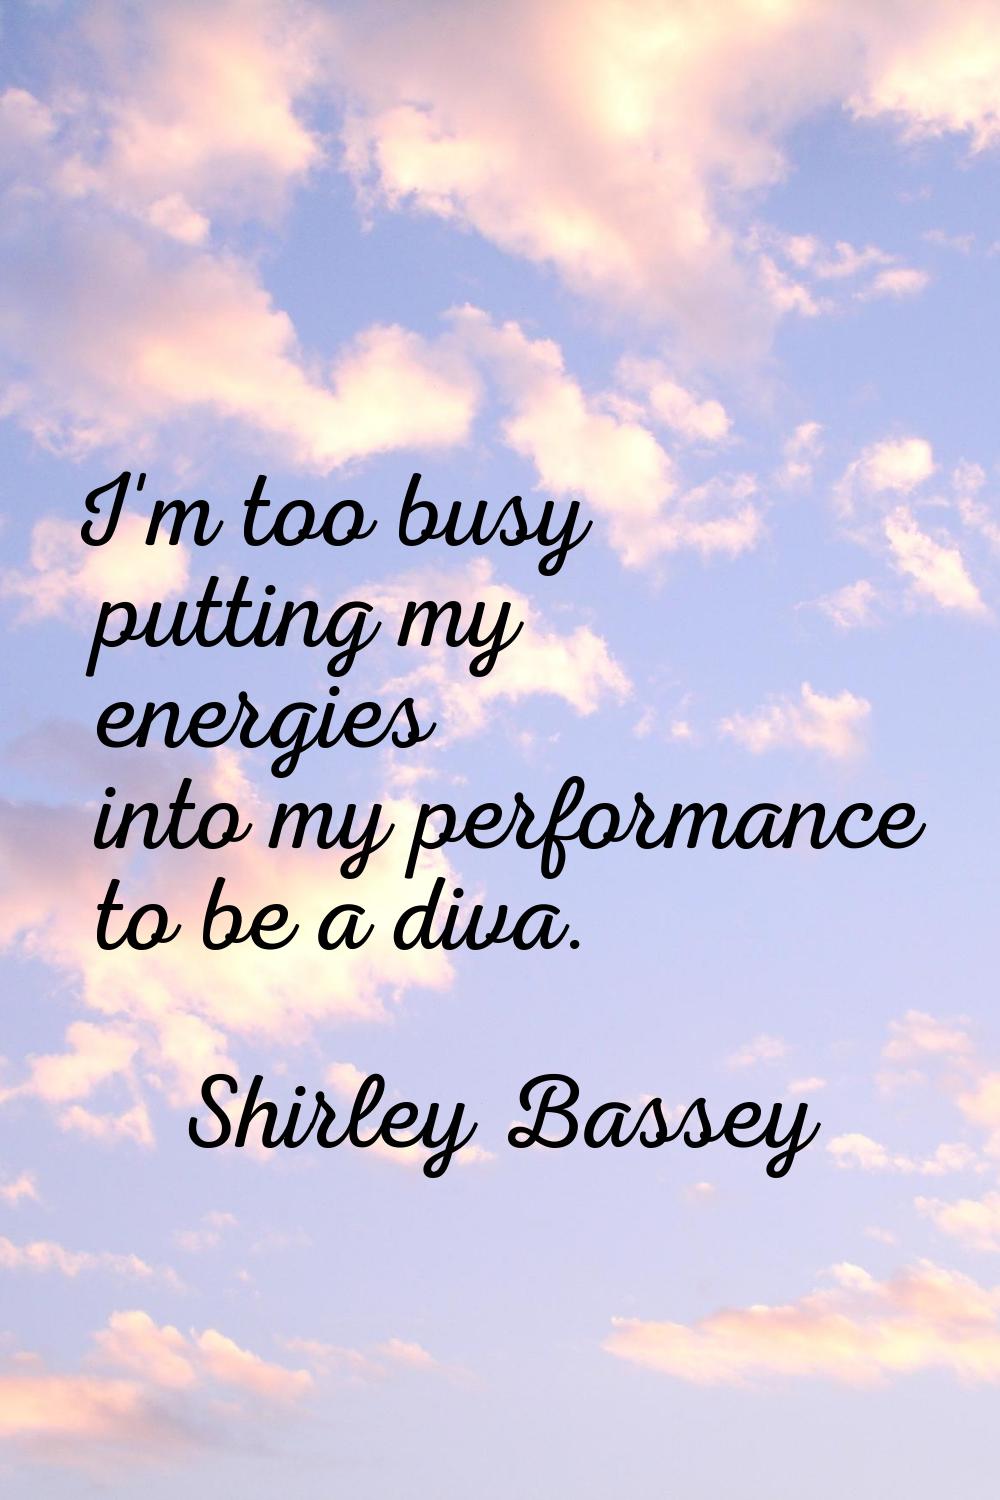 I'm too busy putting my energies into my performance to be a diva.